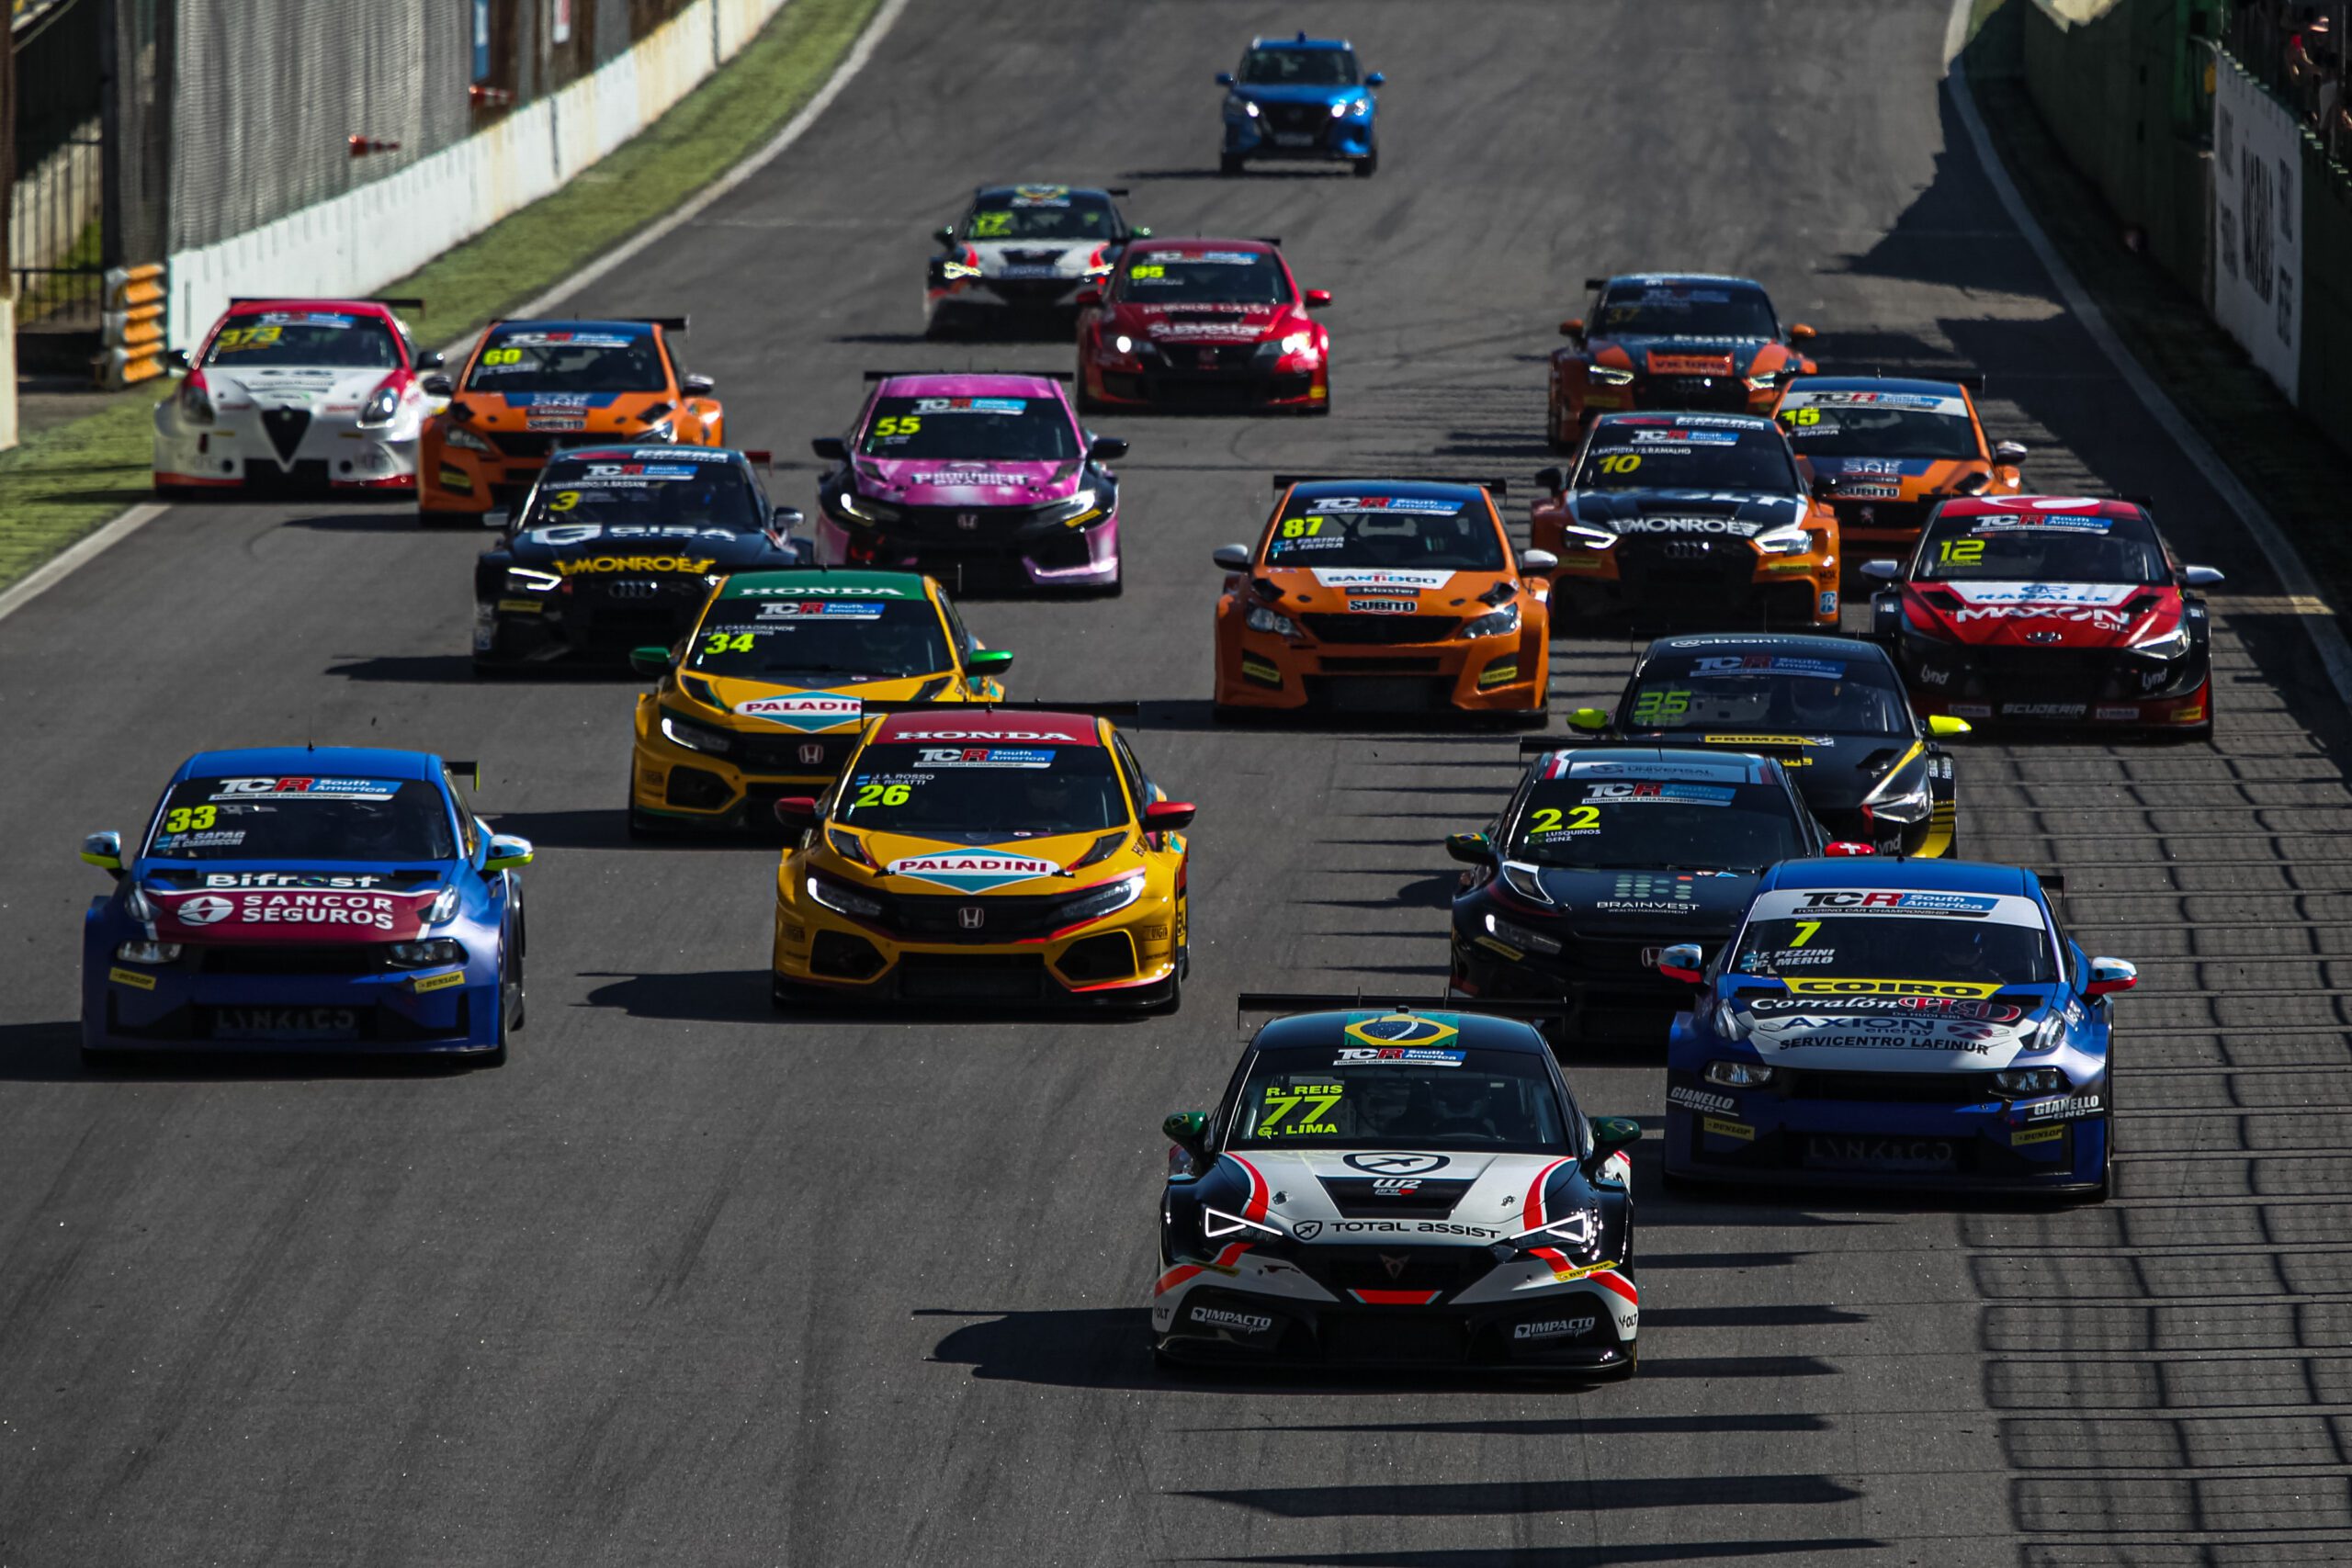 May 1, 2022, Sao Paulo, Sao Paulo, Brasil: Motorsport: FIA/TCR South  America Endurance Stage at Interlagos. May 1, 2022, Sao Paulo, Brazil:  Drivers and teams race for the Endurance stage of TCR